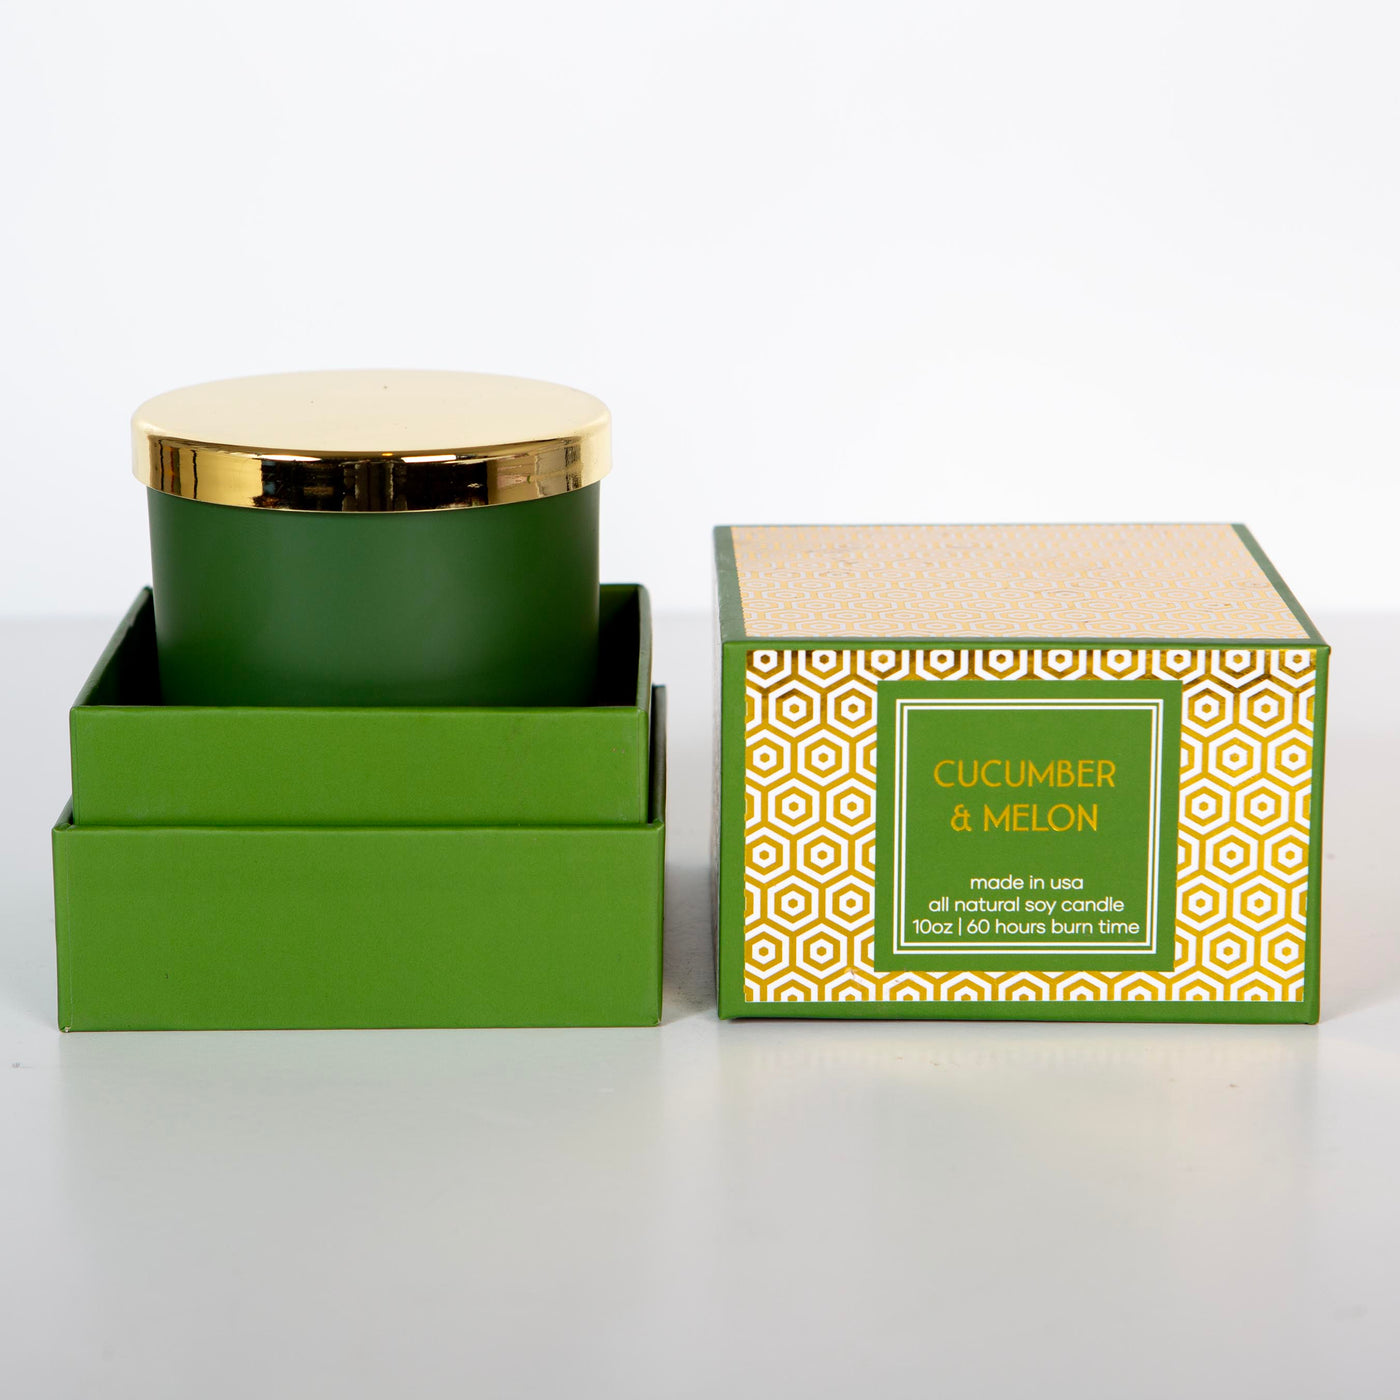 Spa Zen Cucumber & Melon Mid Century Green Boxed Candle